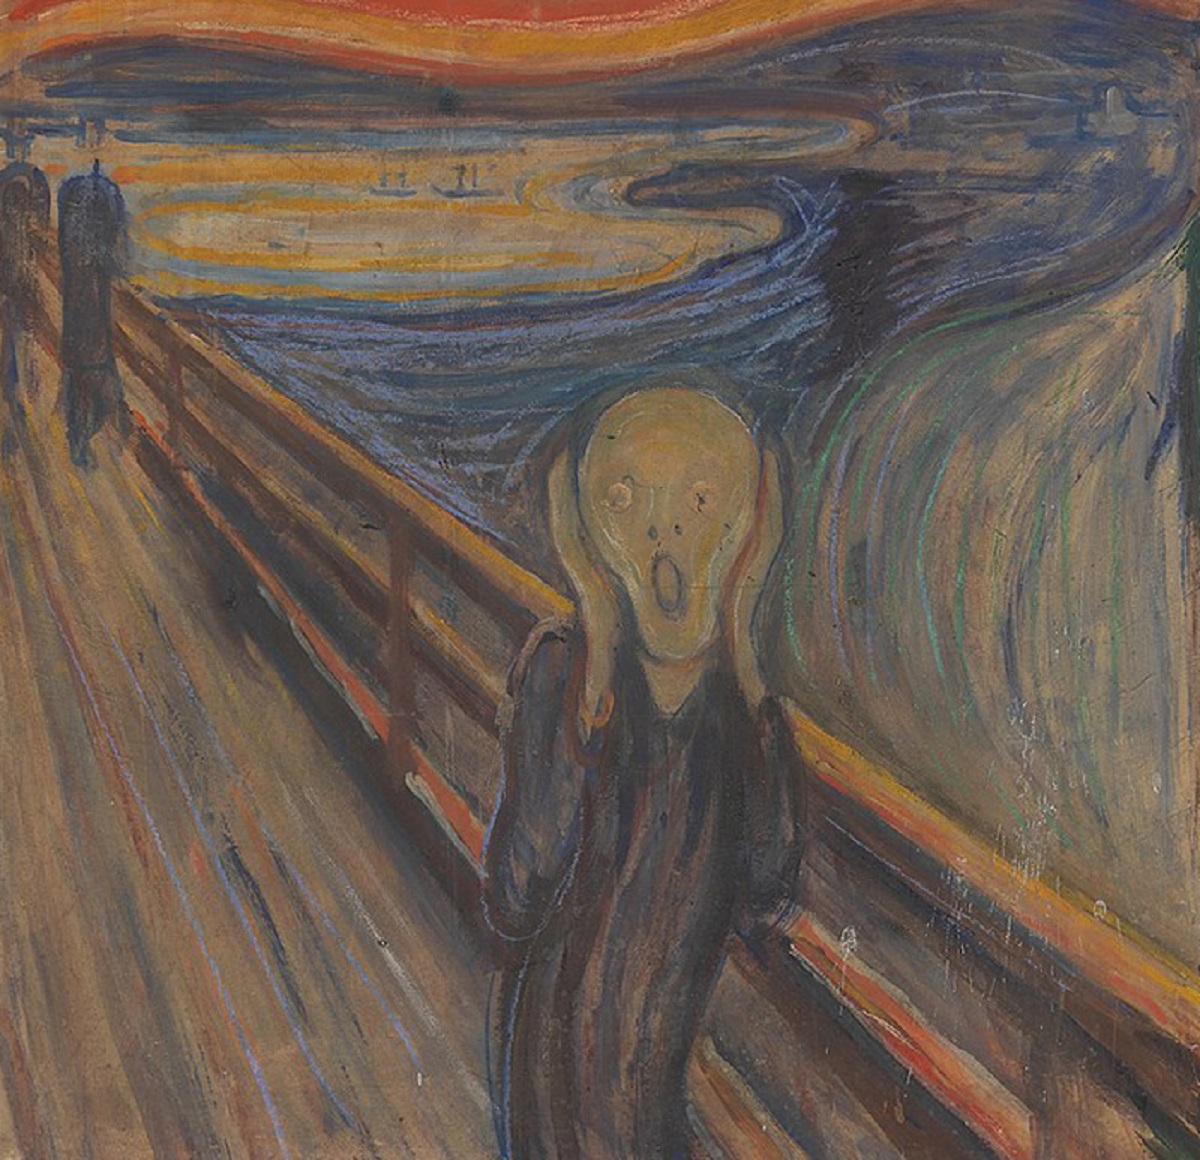 that Edvard Munch's famous painting "The Scream" was painted on cardboard.